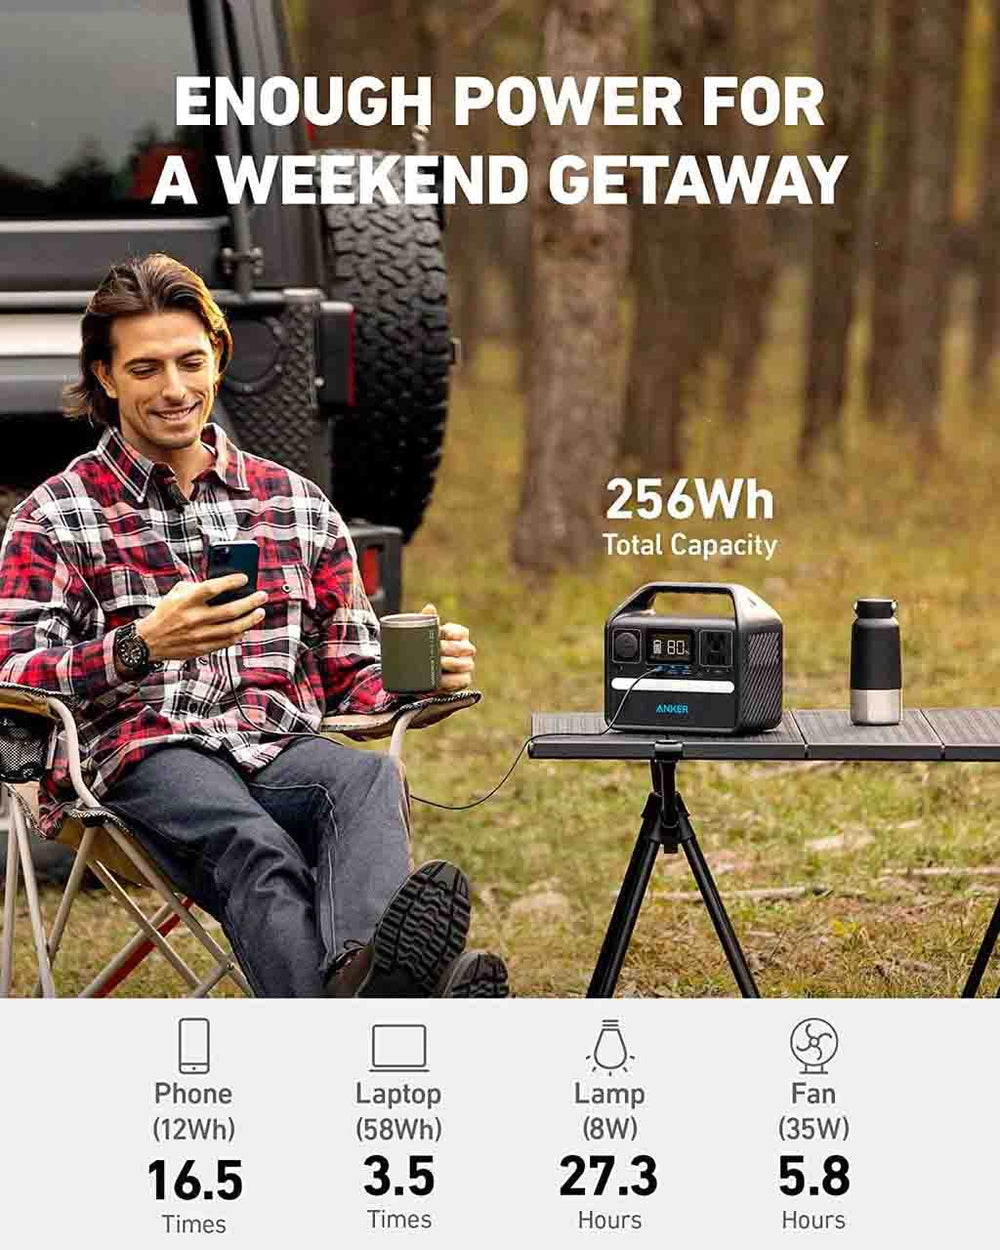 The Anker PowerHouse 521 Provides Enough Power For A Weekend Getaway